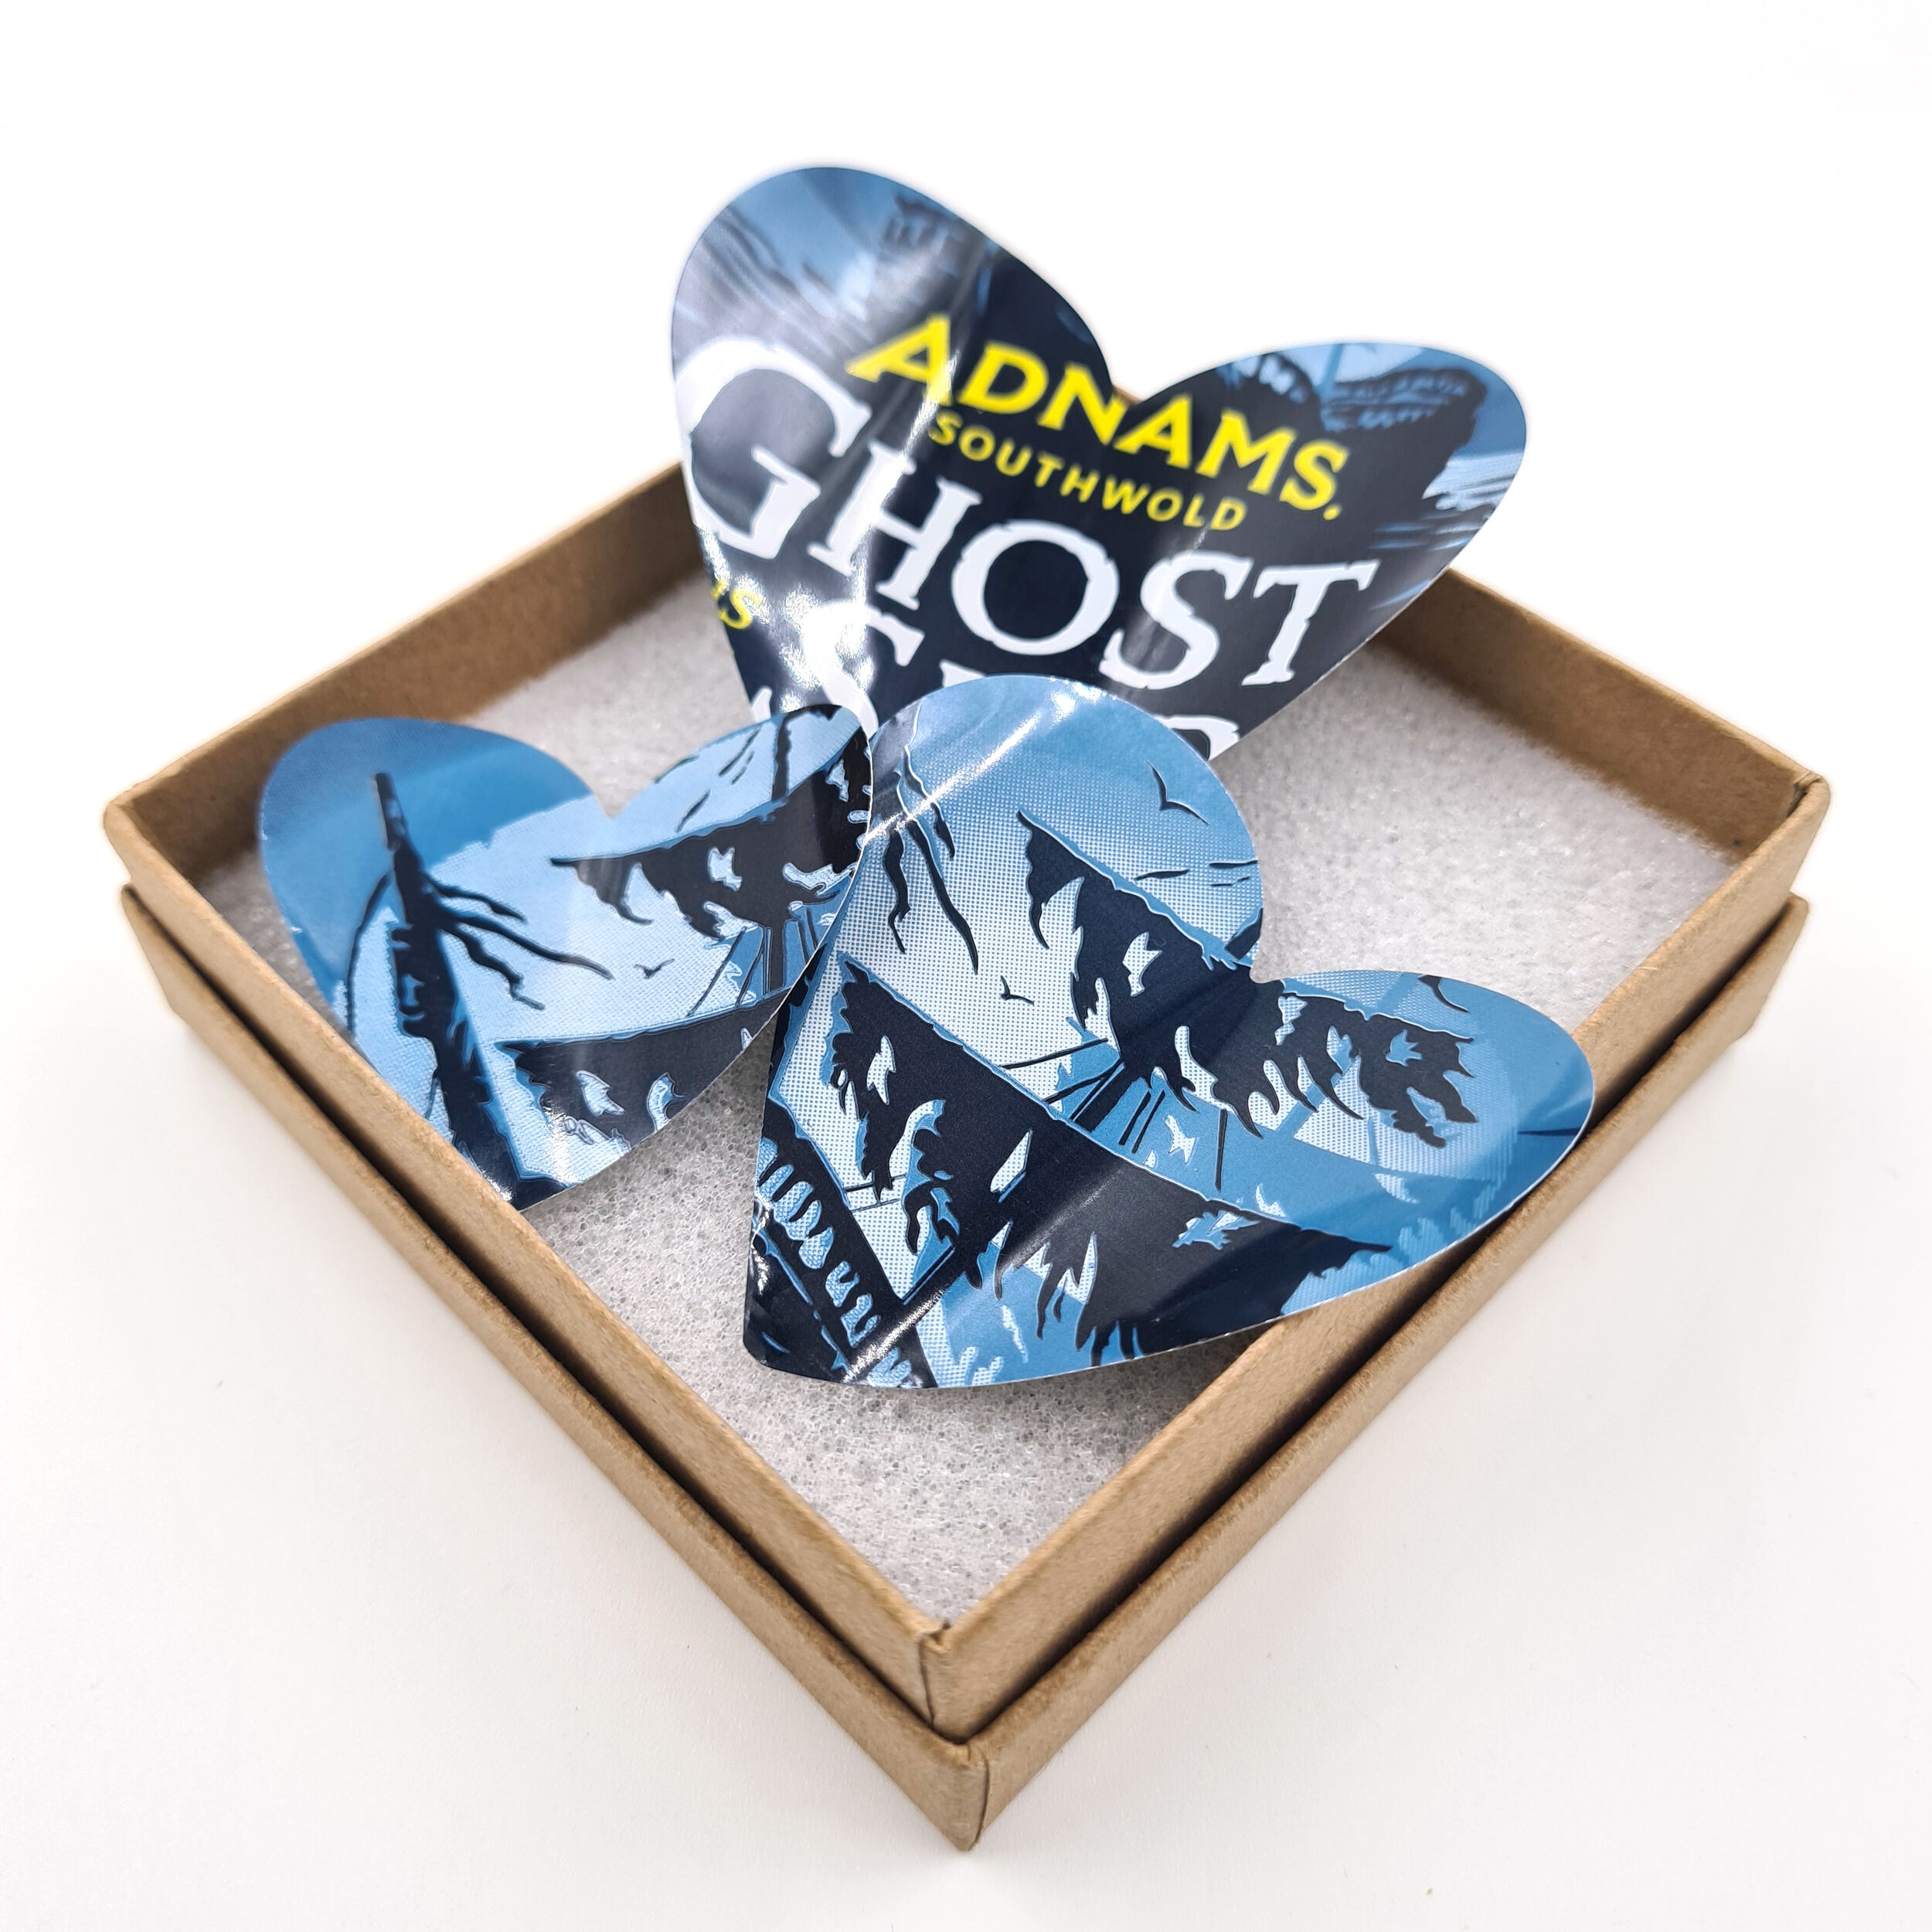 Hand made Three Adnams Heart Can Magnets in box 